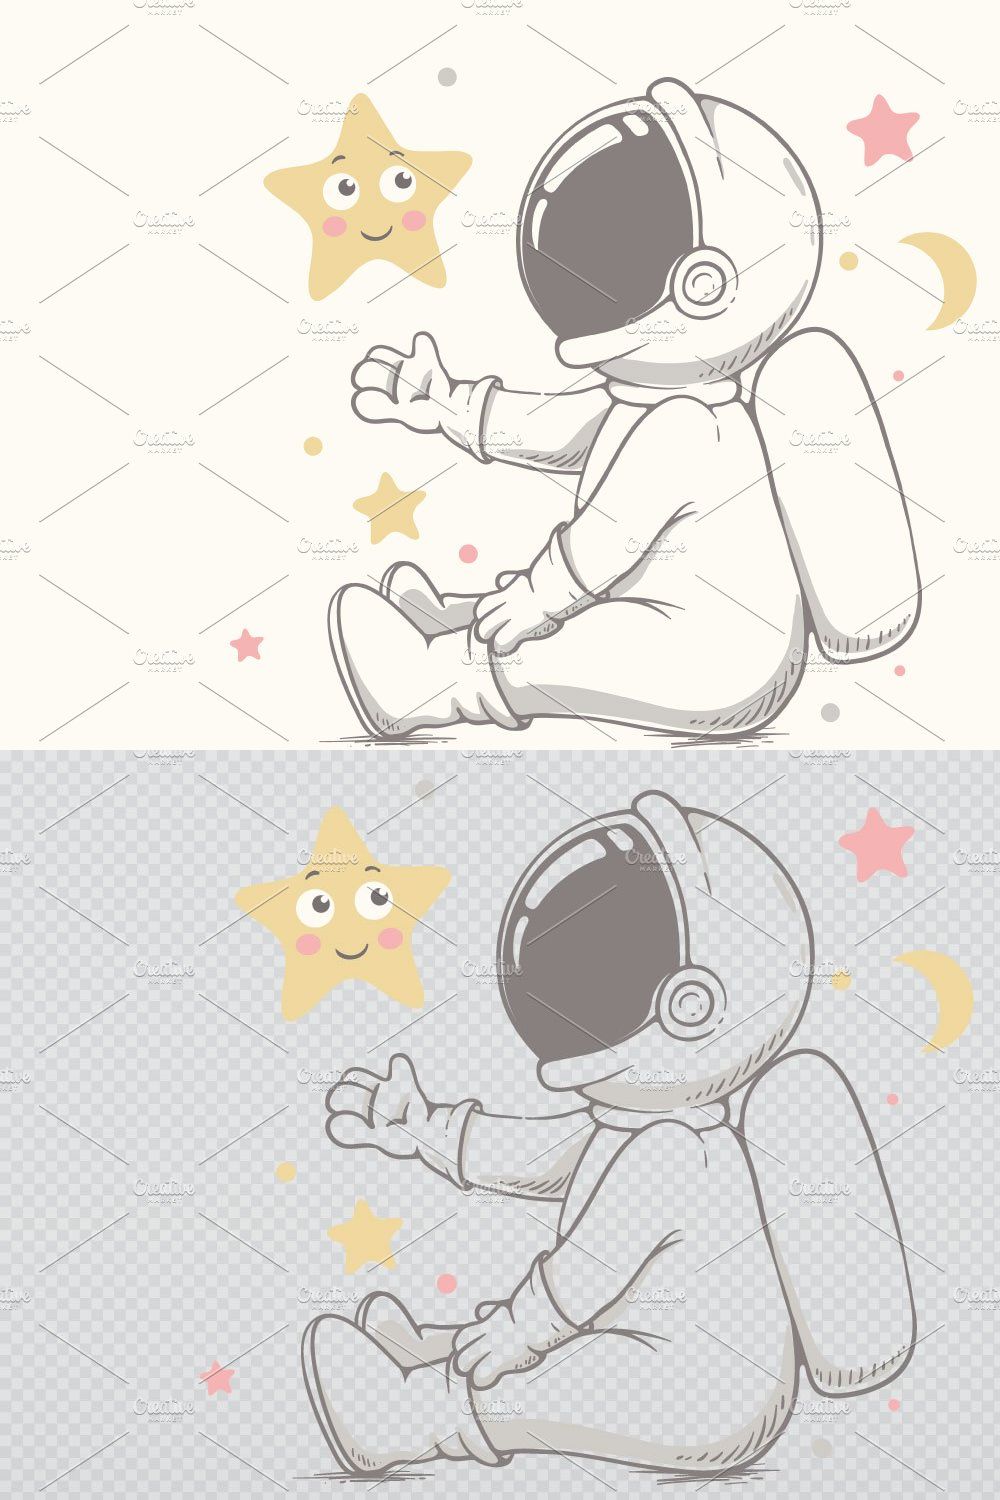 baby astronaut plays with stars pinterest preview image.